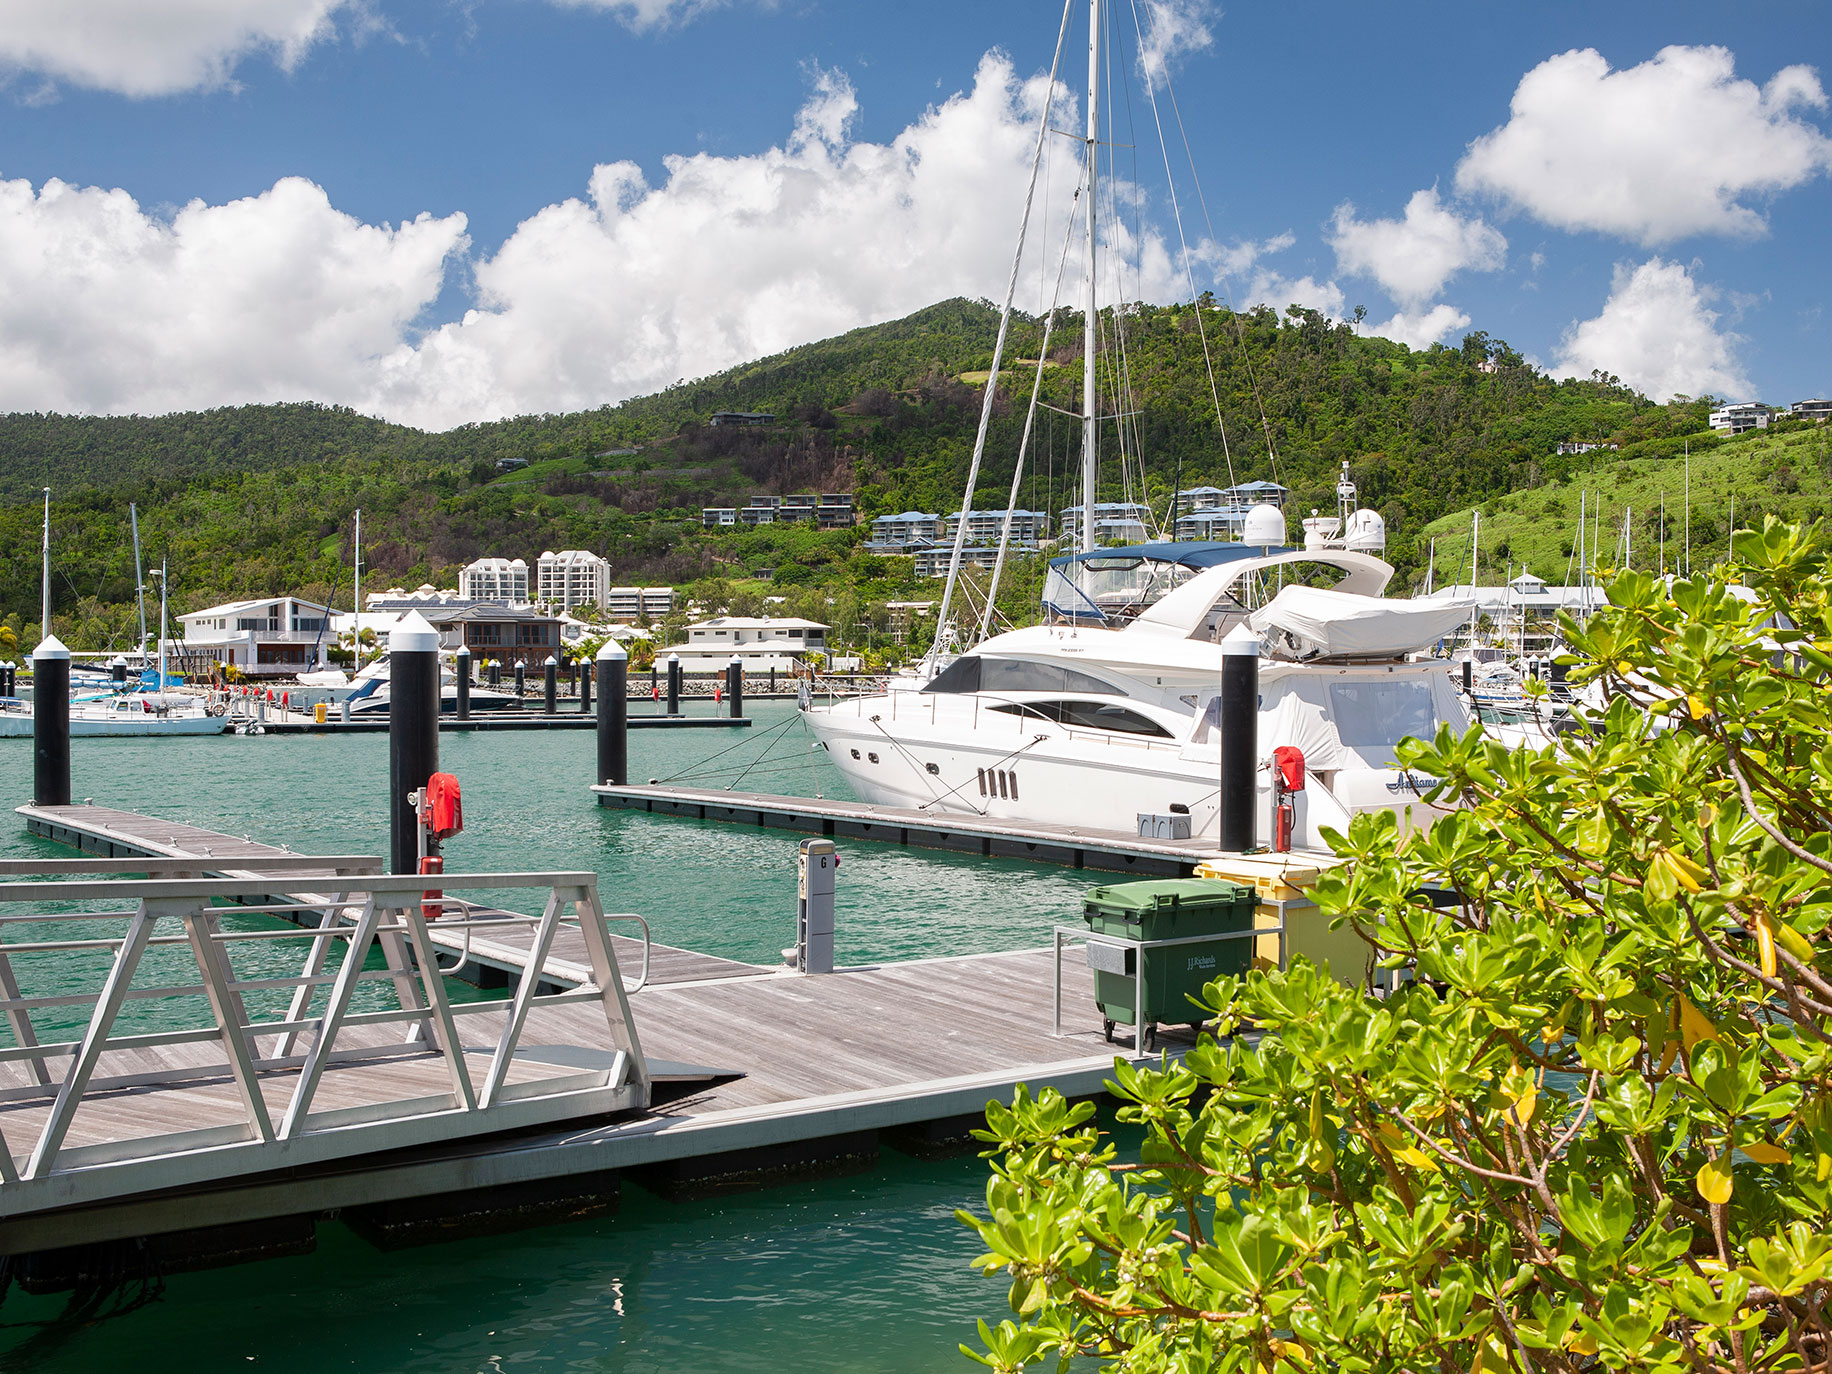 The recently developed Port of Airlie features a new passenger terminal along side private moorings 